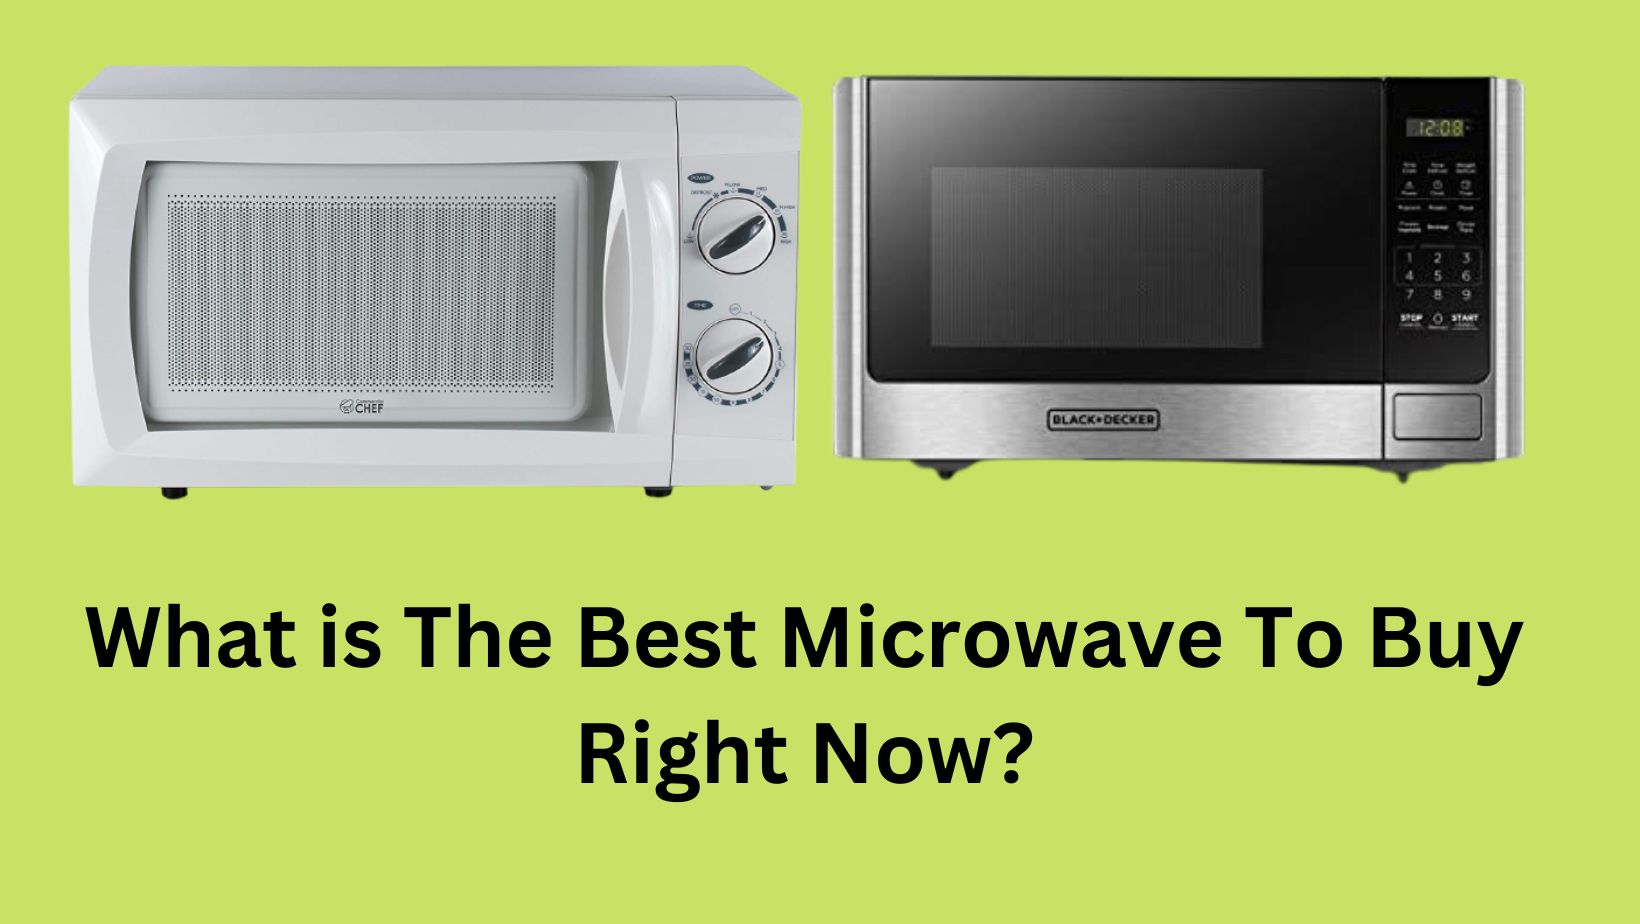 What is The Best Microwave To Buy Right Now?